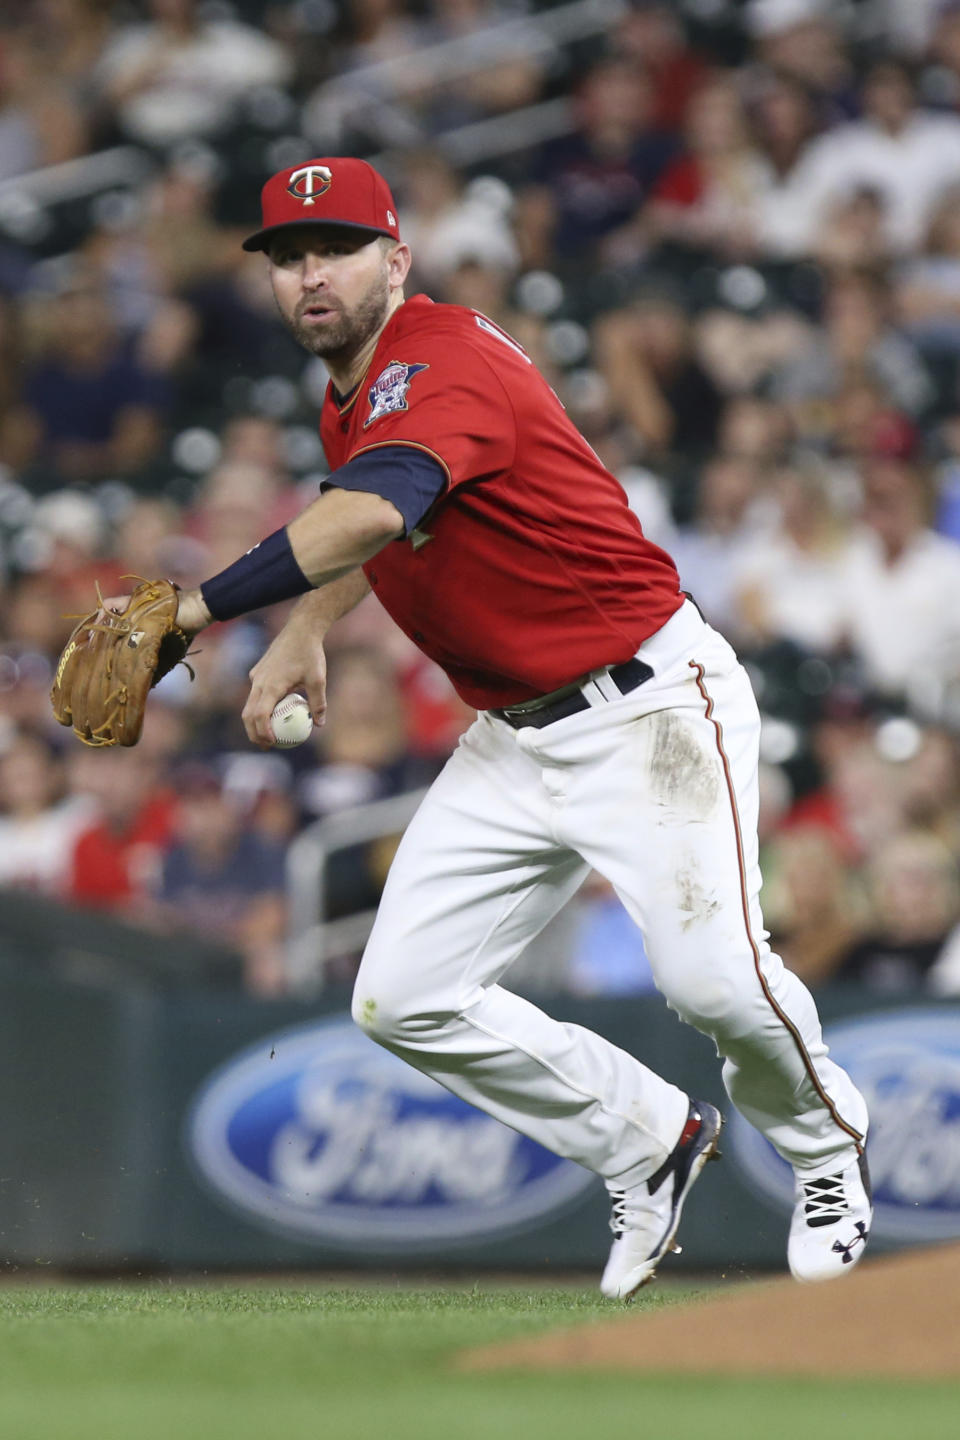 Minnesota Twins' Brian Dozier looks to throw the ball against the Cleveland Indians in the sixth inning of a baseball game Monday, July 30, 2018 in Minneapolis. Minnesota won 5-4. (AP Photo/Stacy Bengs)